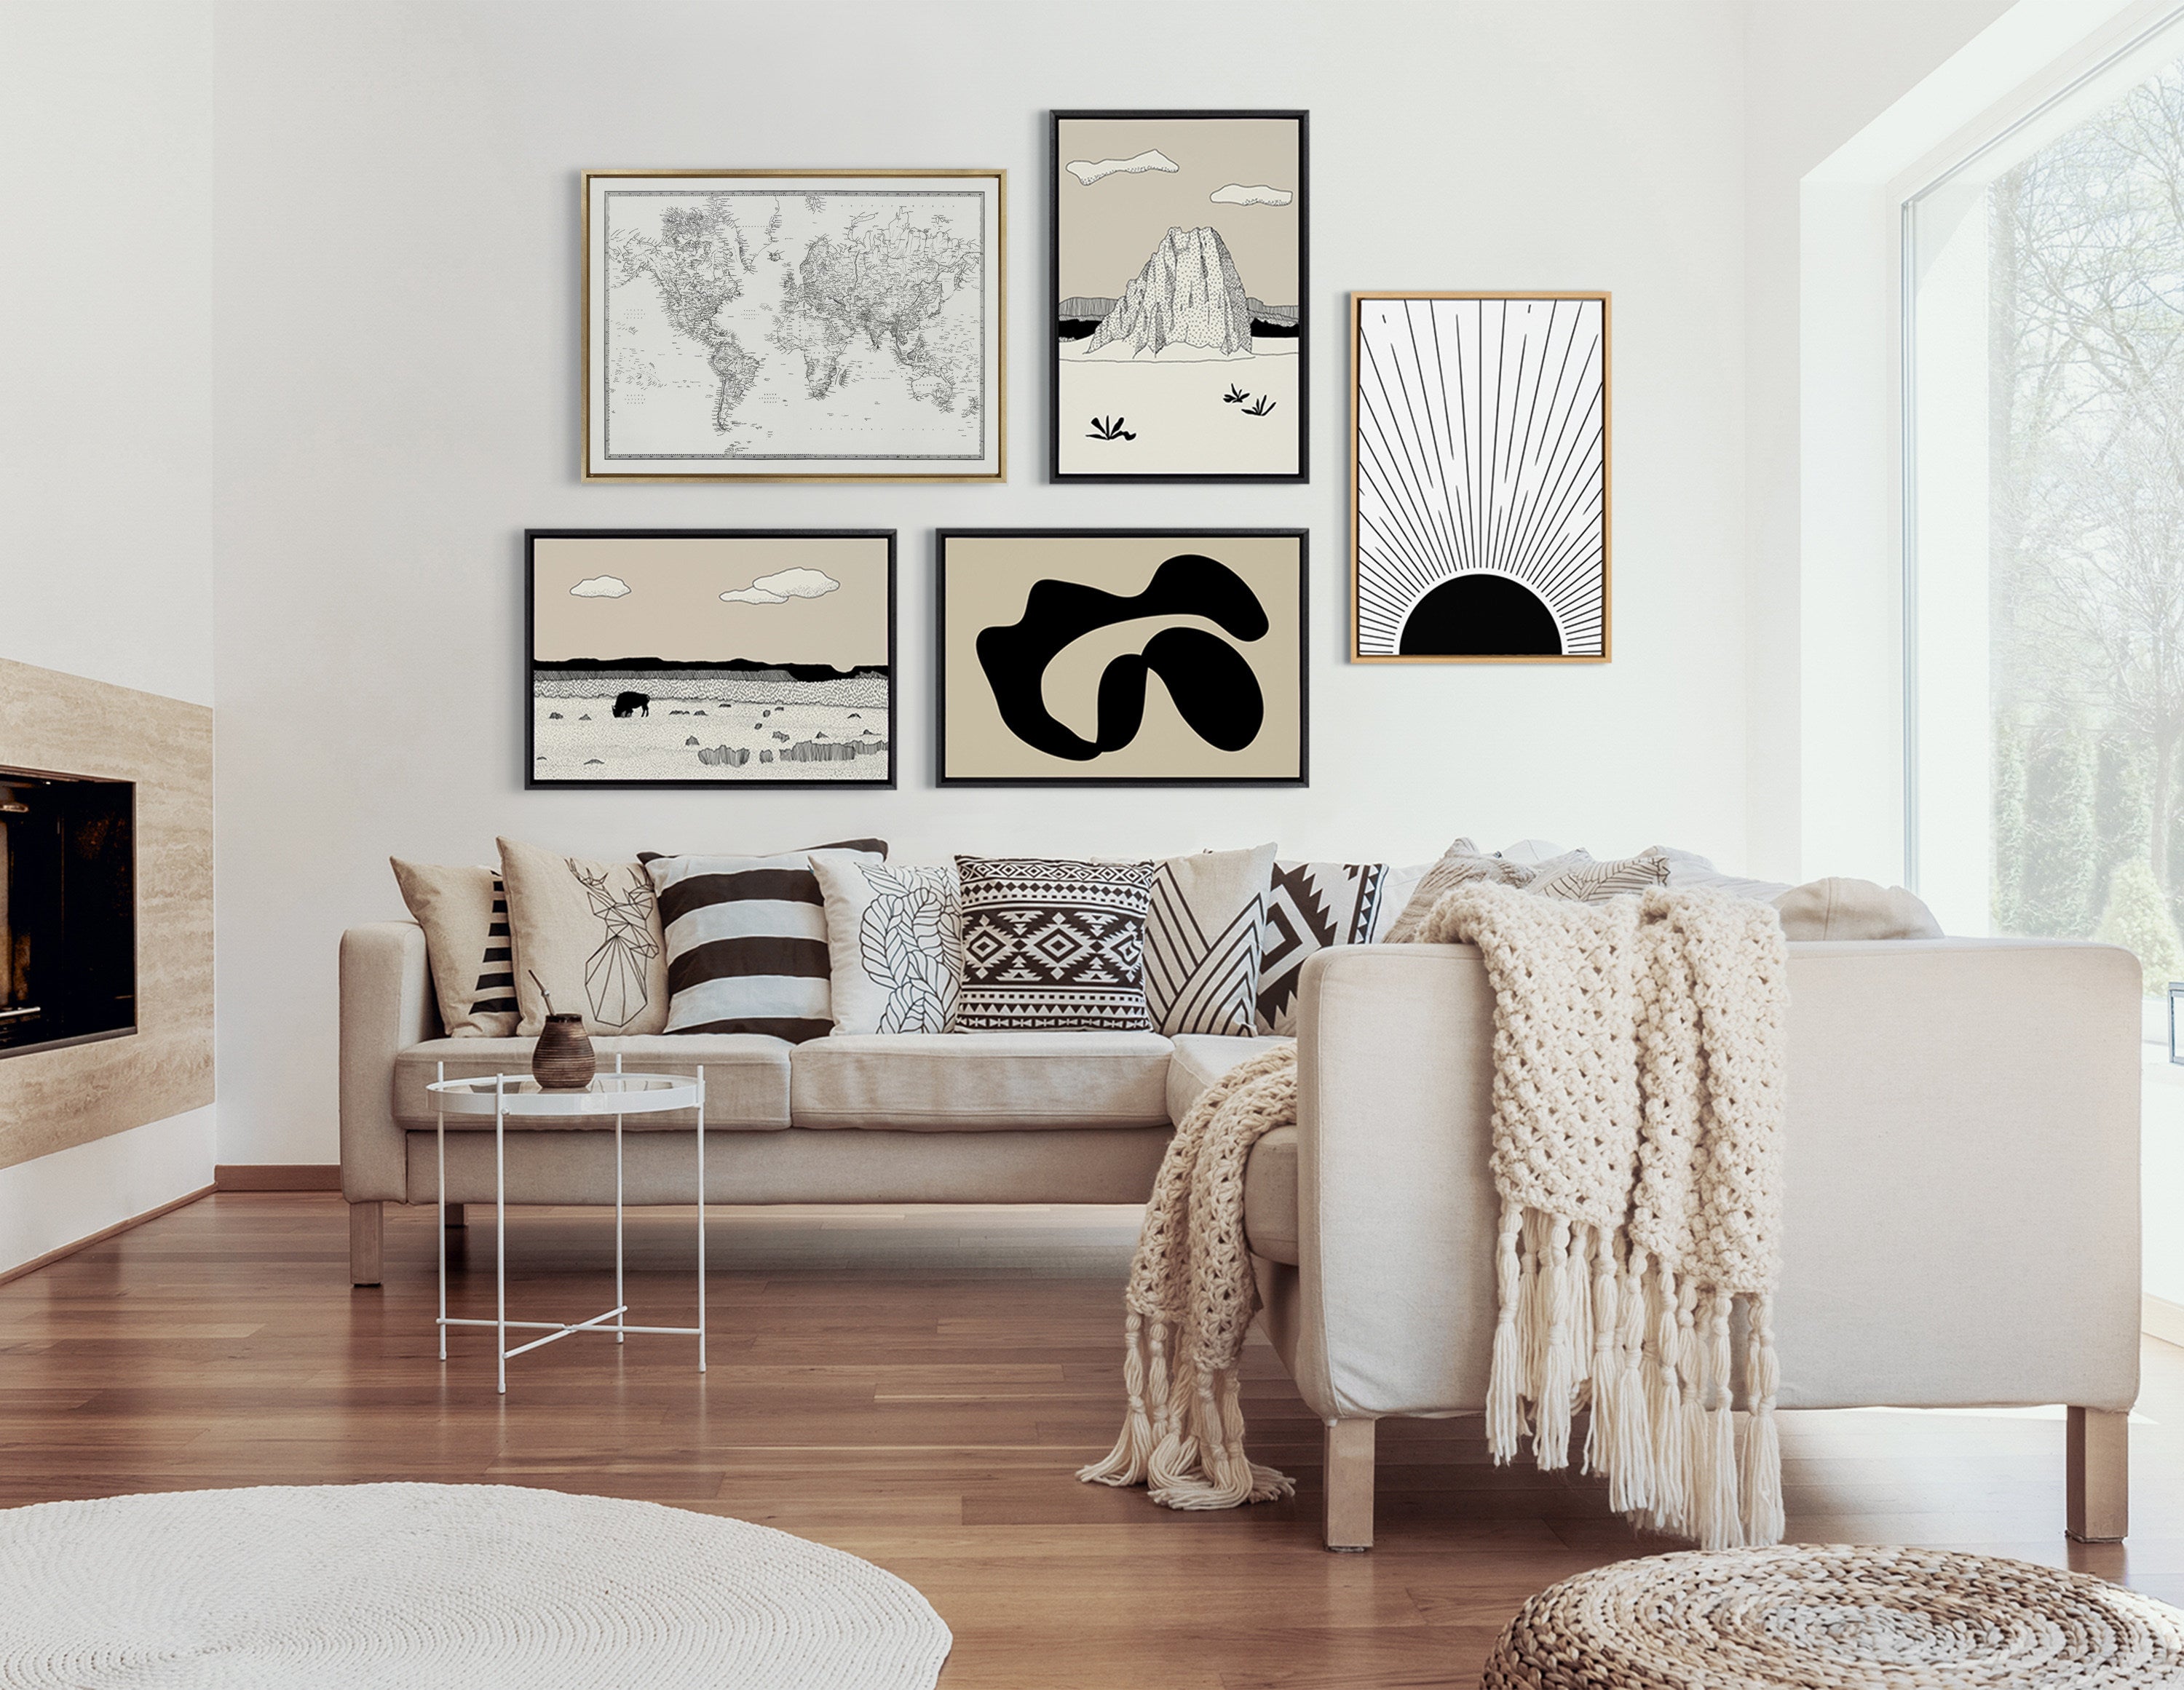 Sylvie Vintage Black and White World Map Framed Canvas by The Creative Bunch Studio